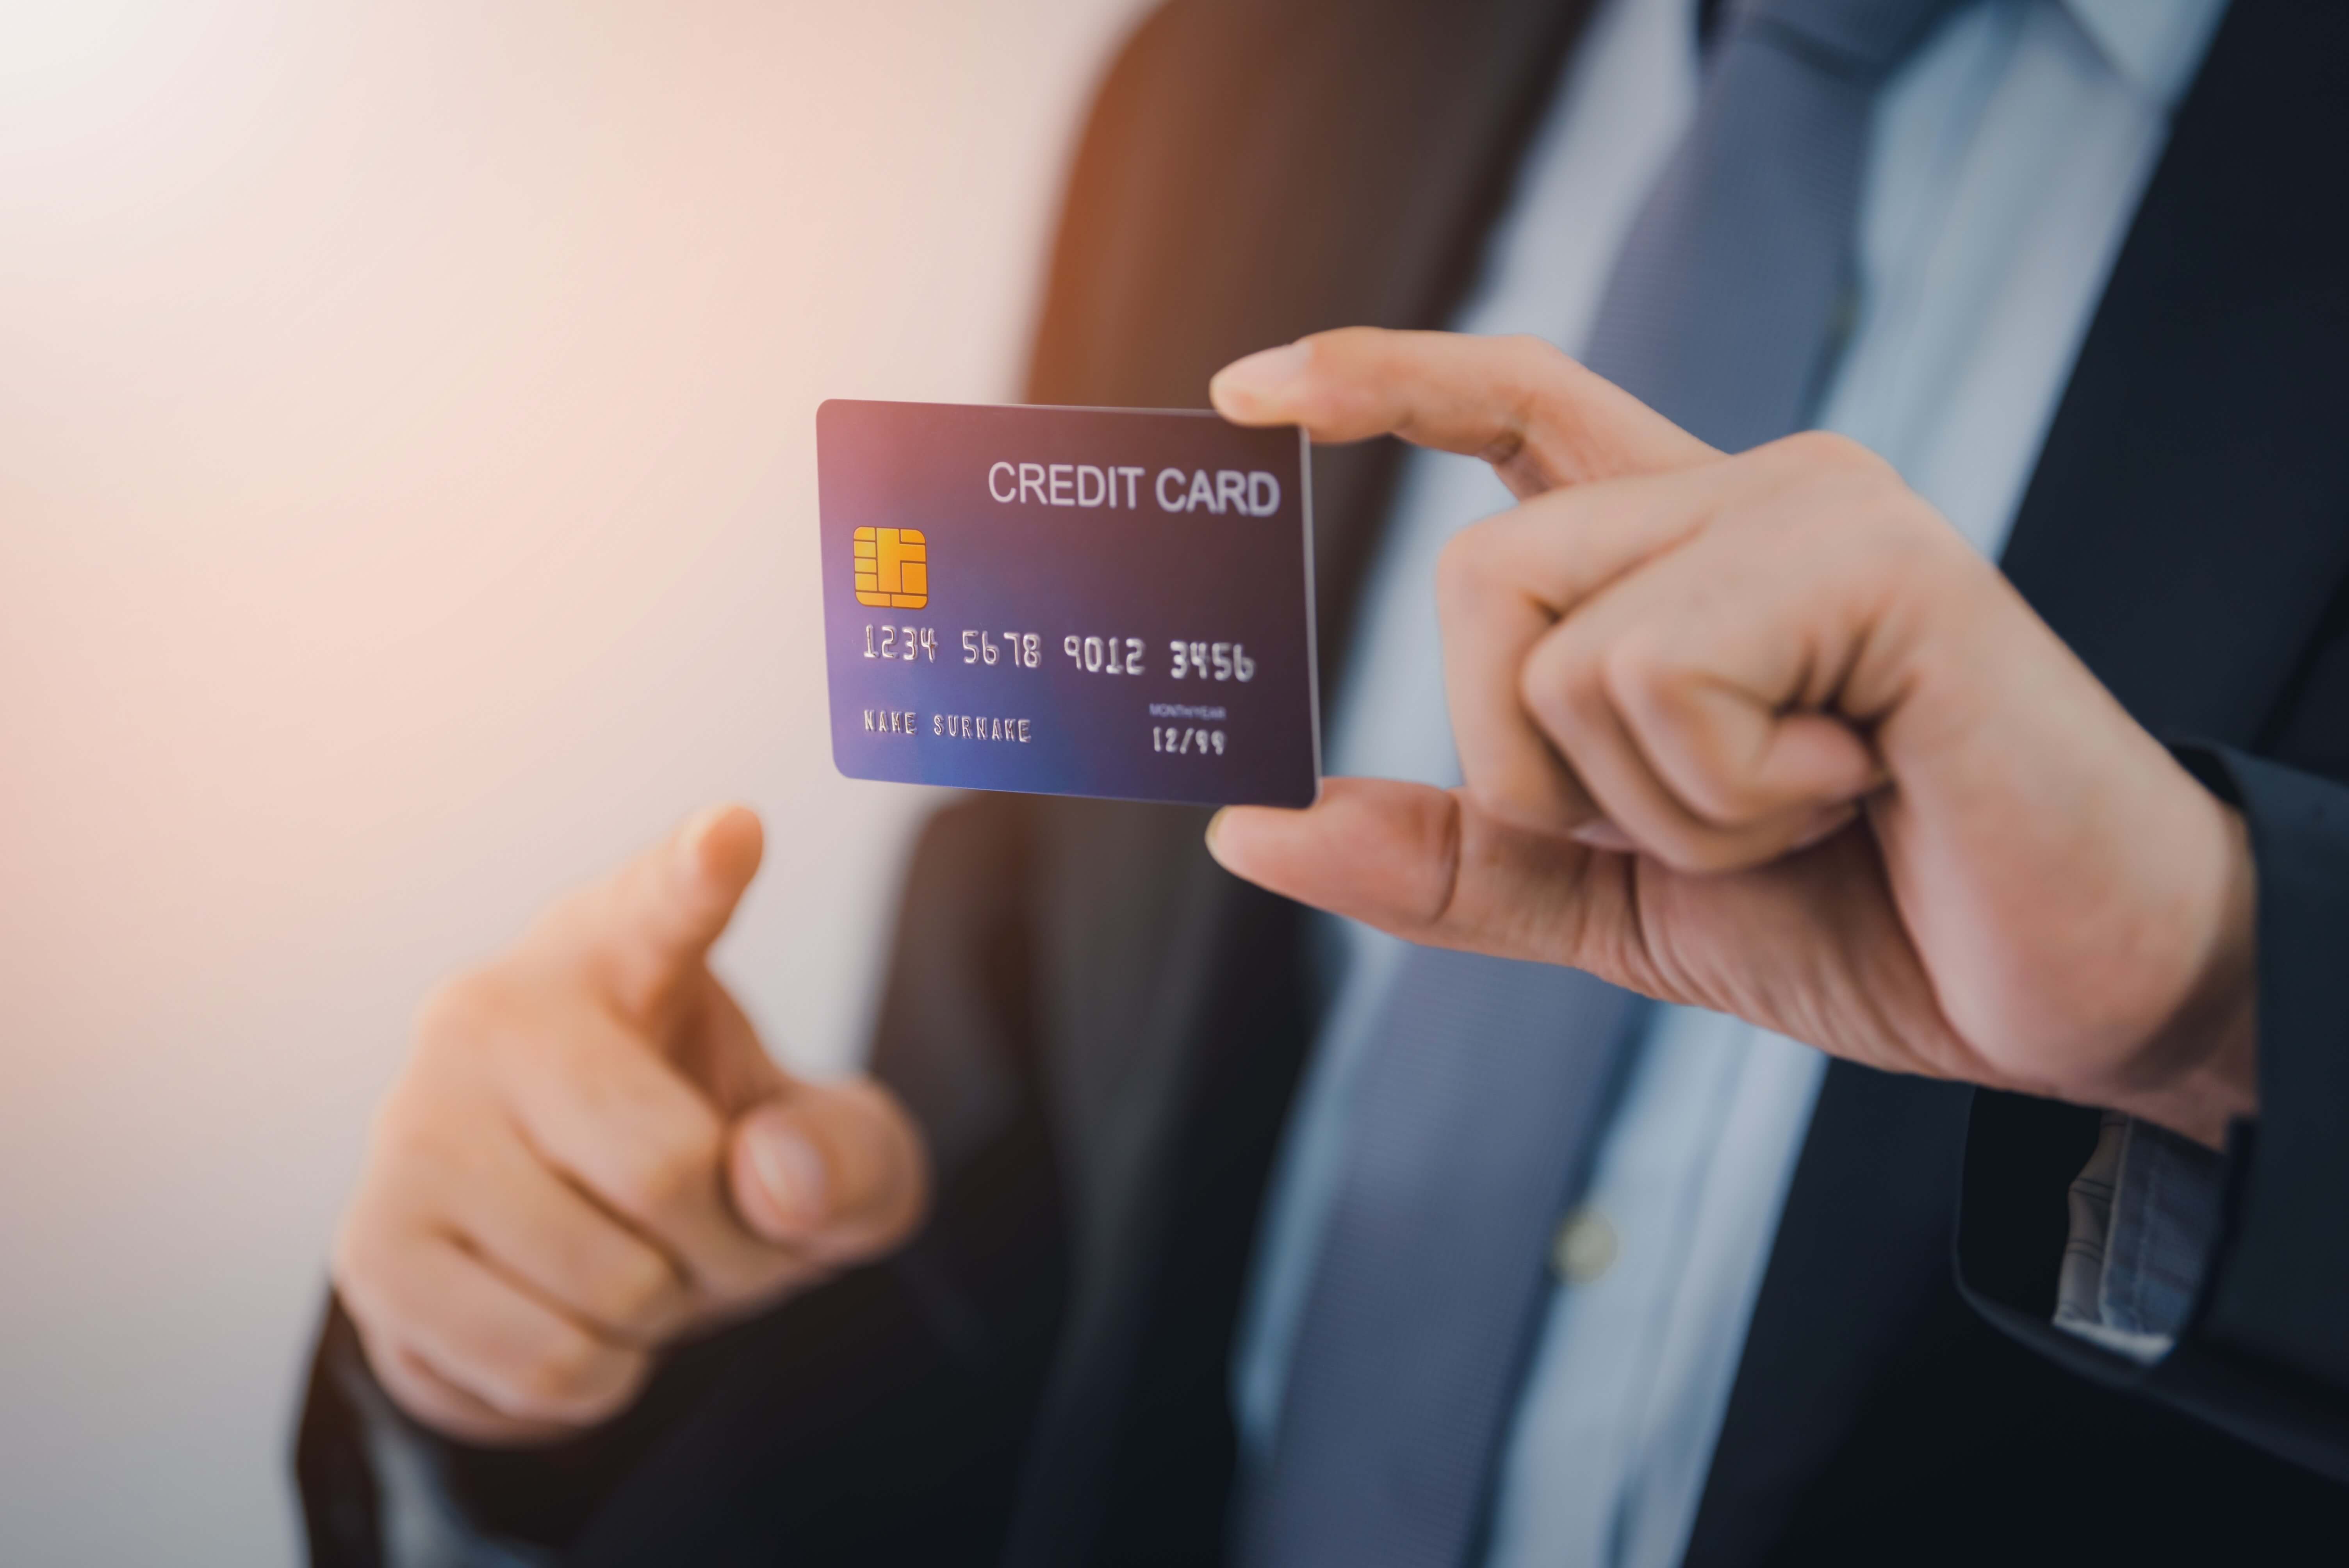 Understanding credit card consumer usage trends, overall traditional card experience and gaps, and new age credit card experience and feedback